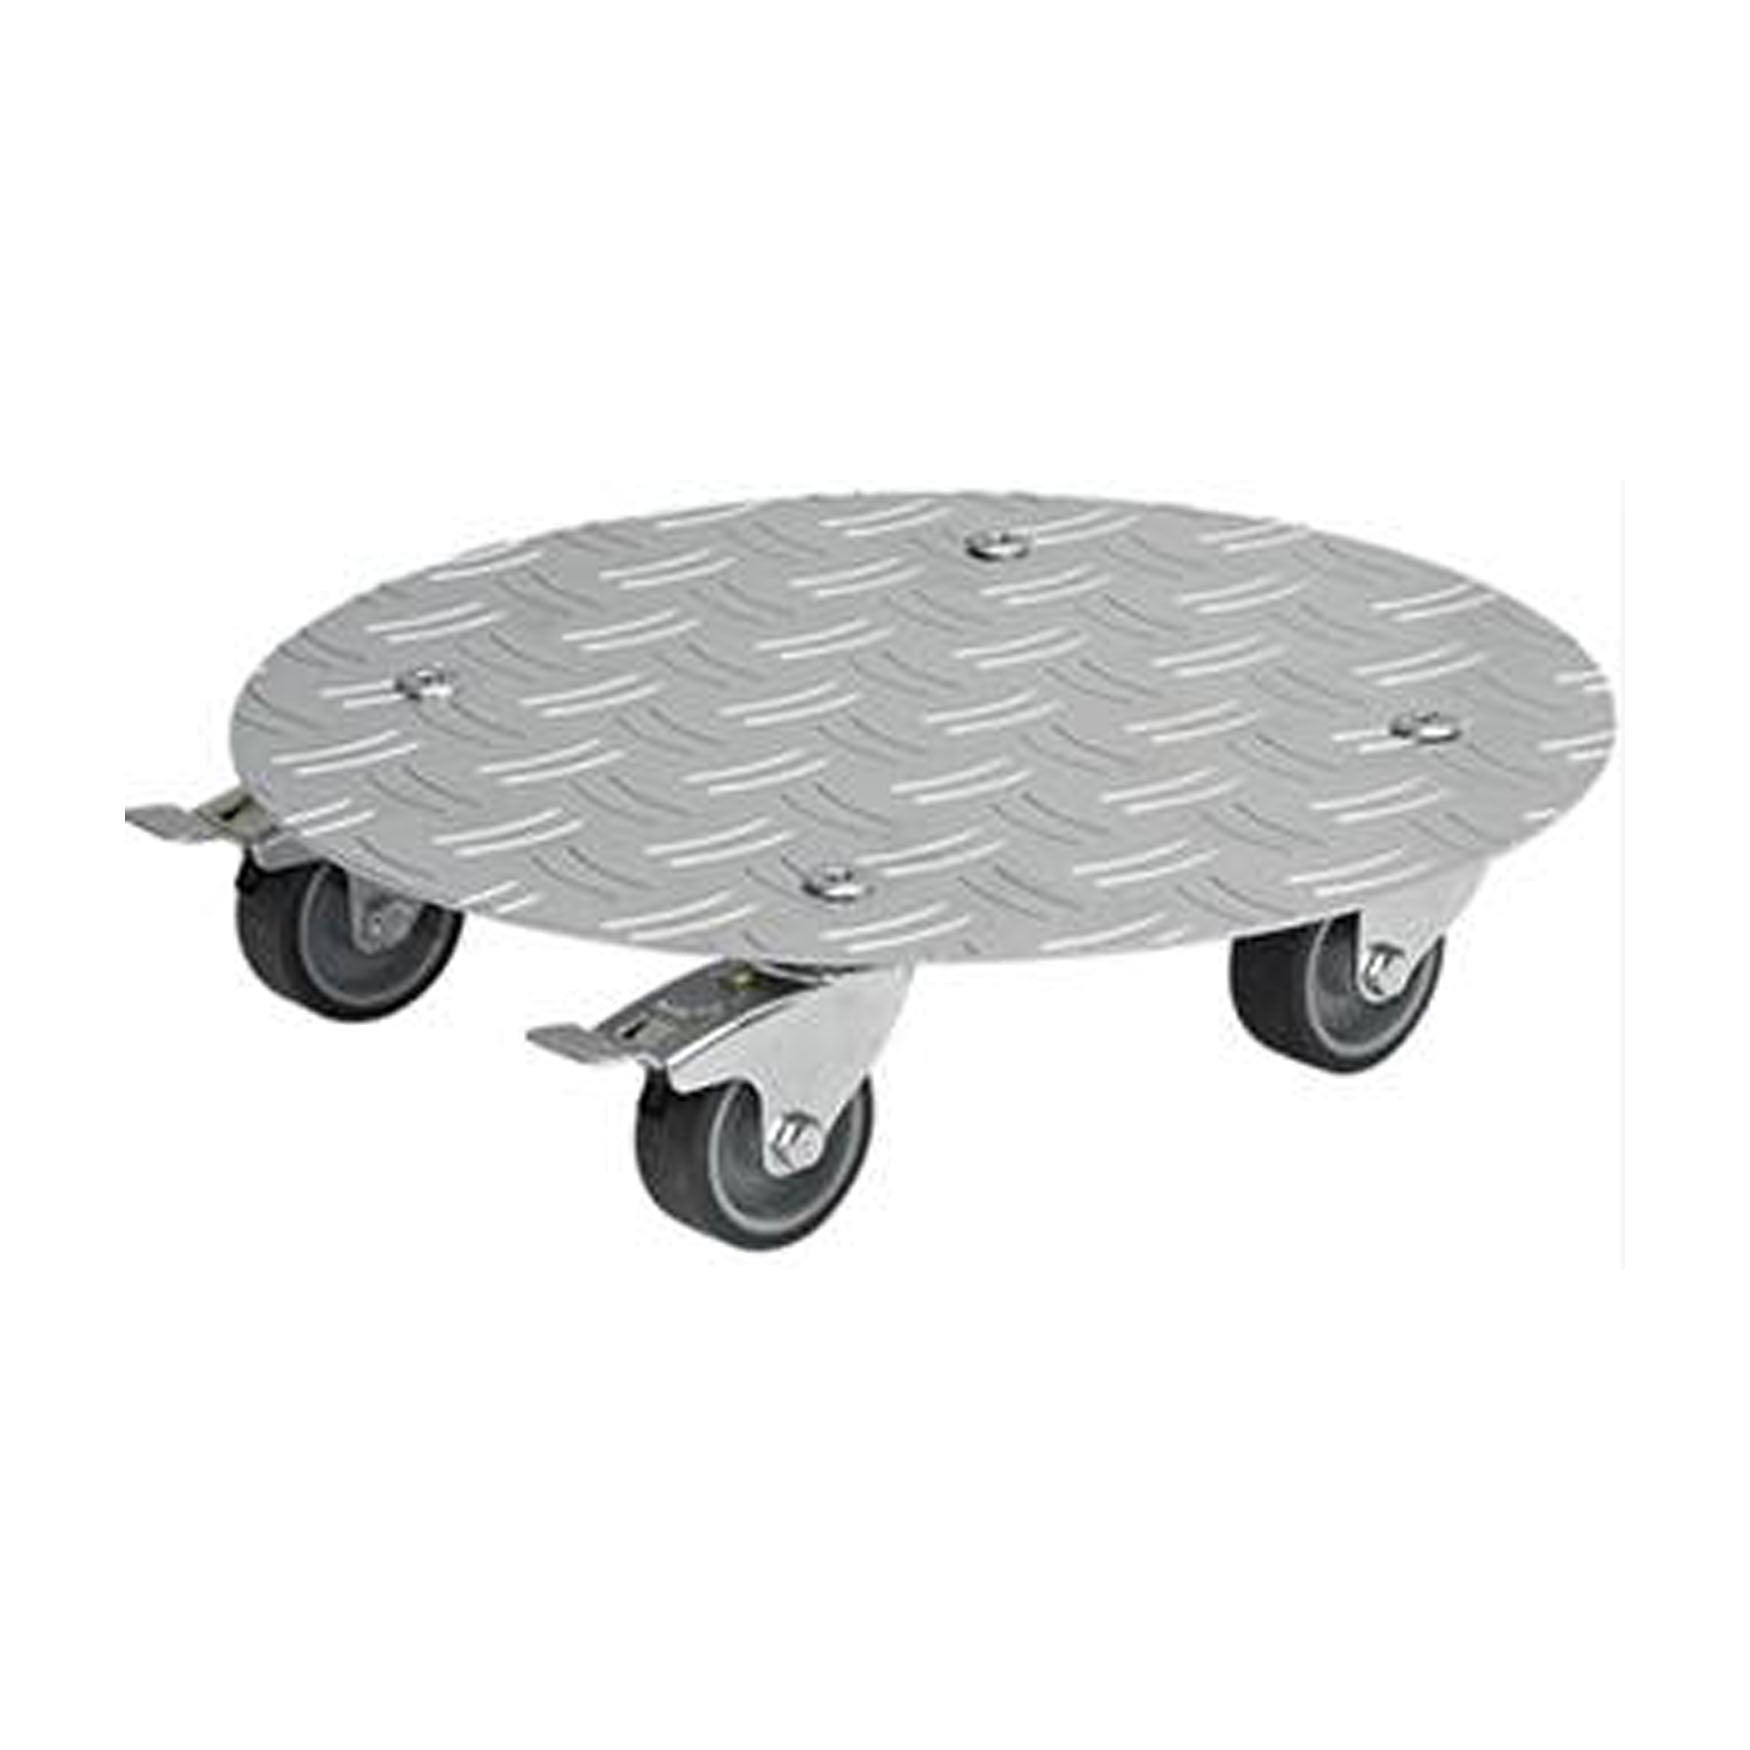 Silver Round Diamond Plated Aluminum Plant Caddy with brakes. 220 lbs capacity. 11.8"D x 2.75"H, 2.2 lbs.